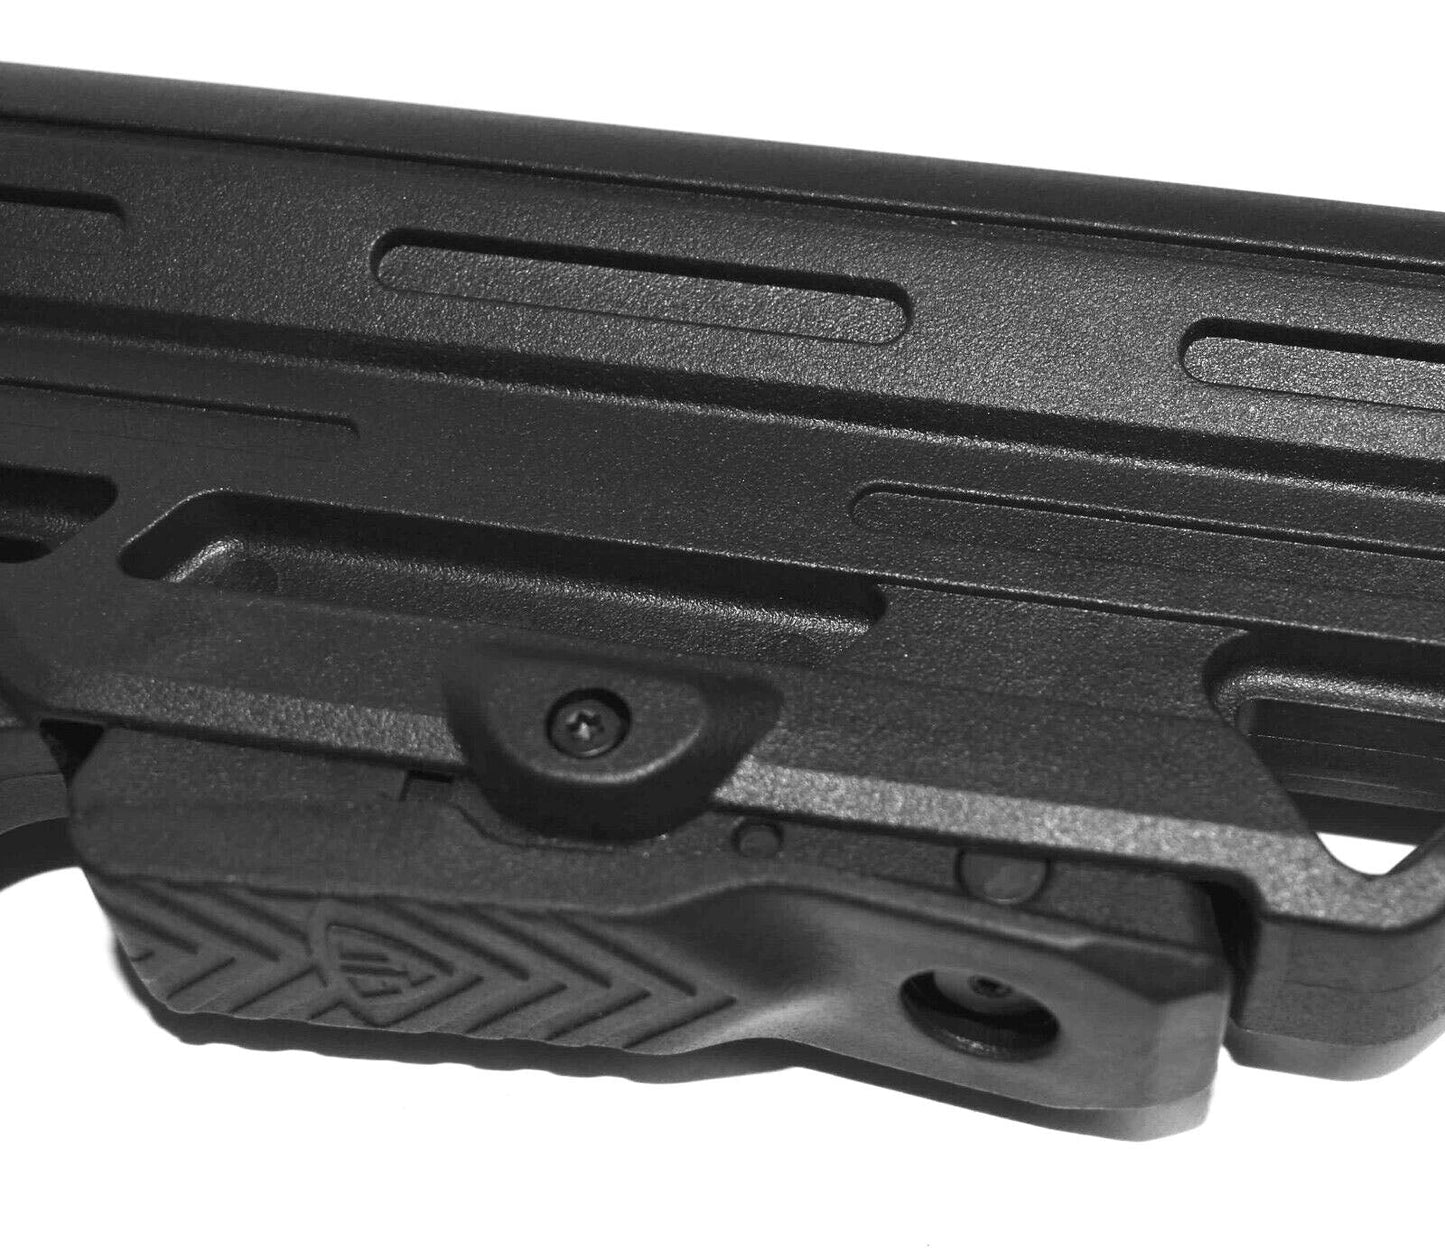 Tactical Fury Stock Compatible With Mossberg 500 20 Gauge Pump. - TRINITY SUPPLY INC